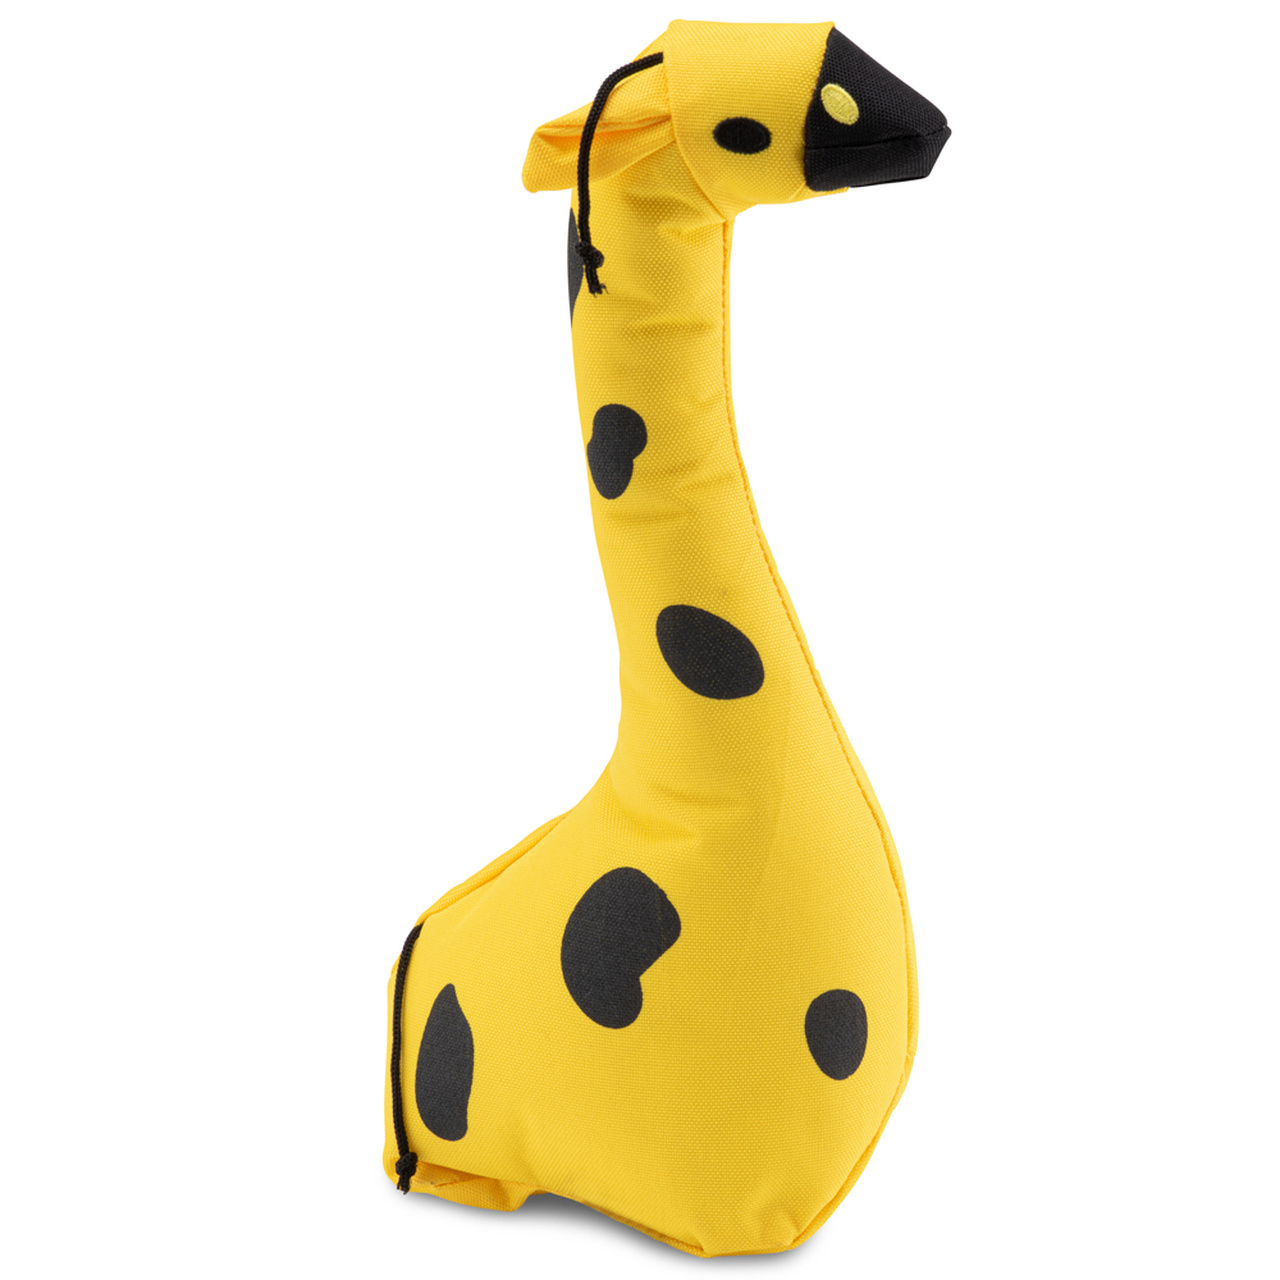 Beco Recycled & Soft Stofftier Giraffe "George"